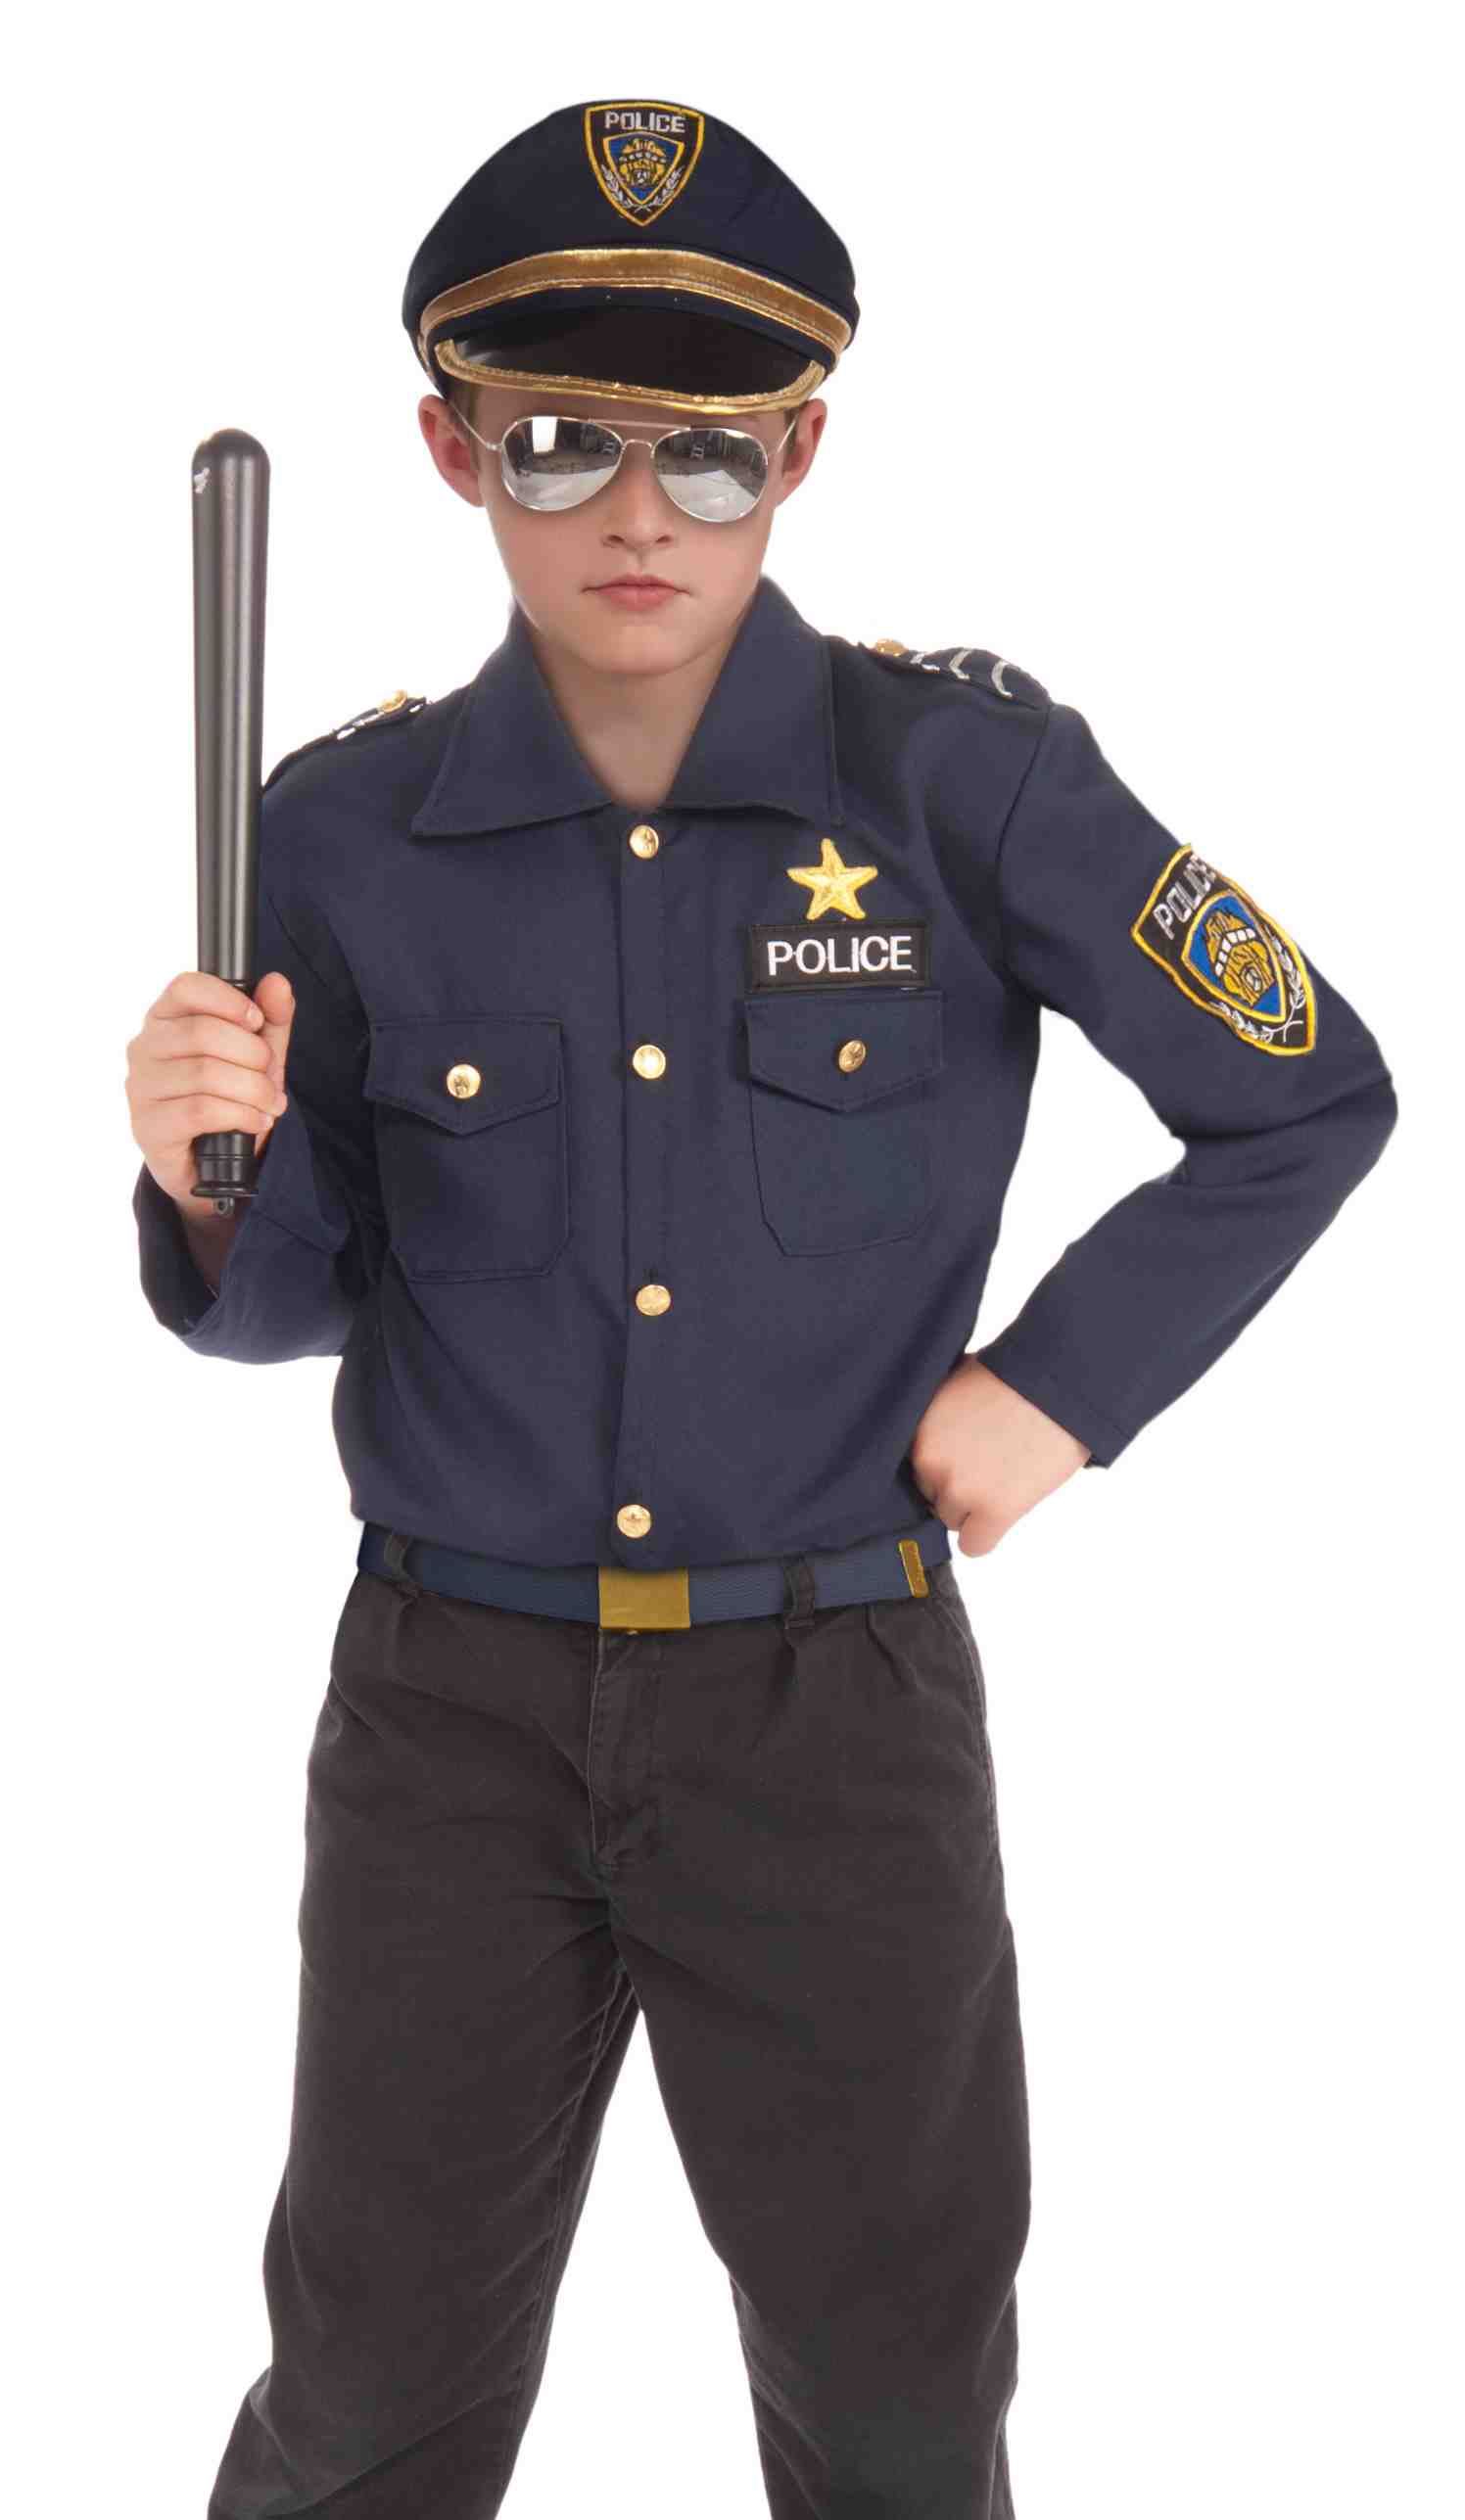 Kids Boys Instant Police Costume | $16.99 | The Costume Land